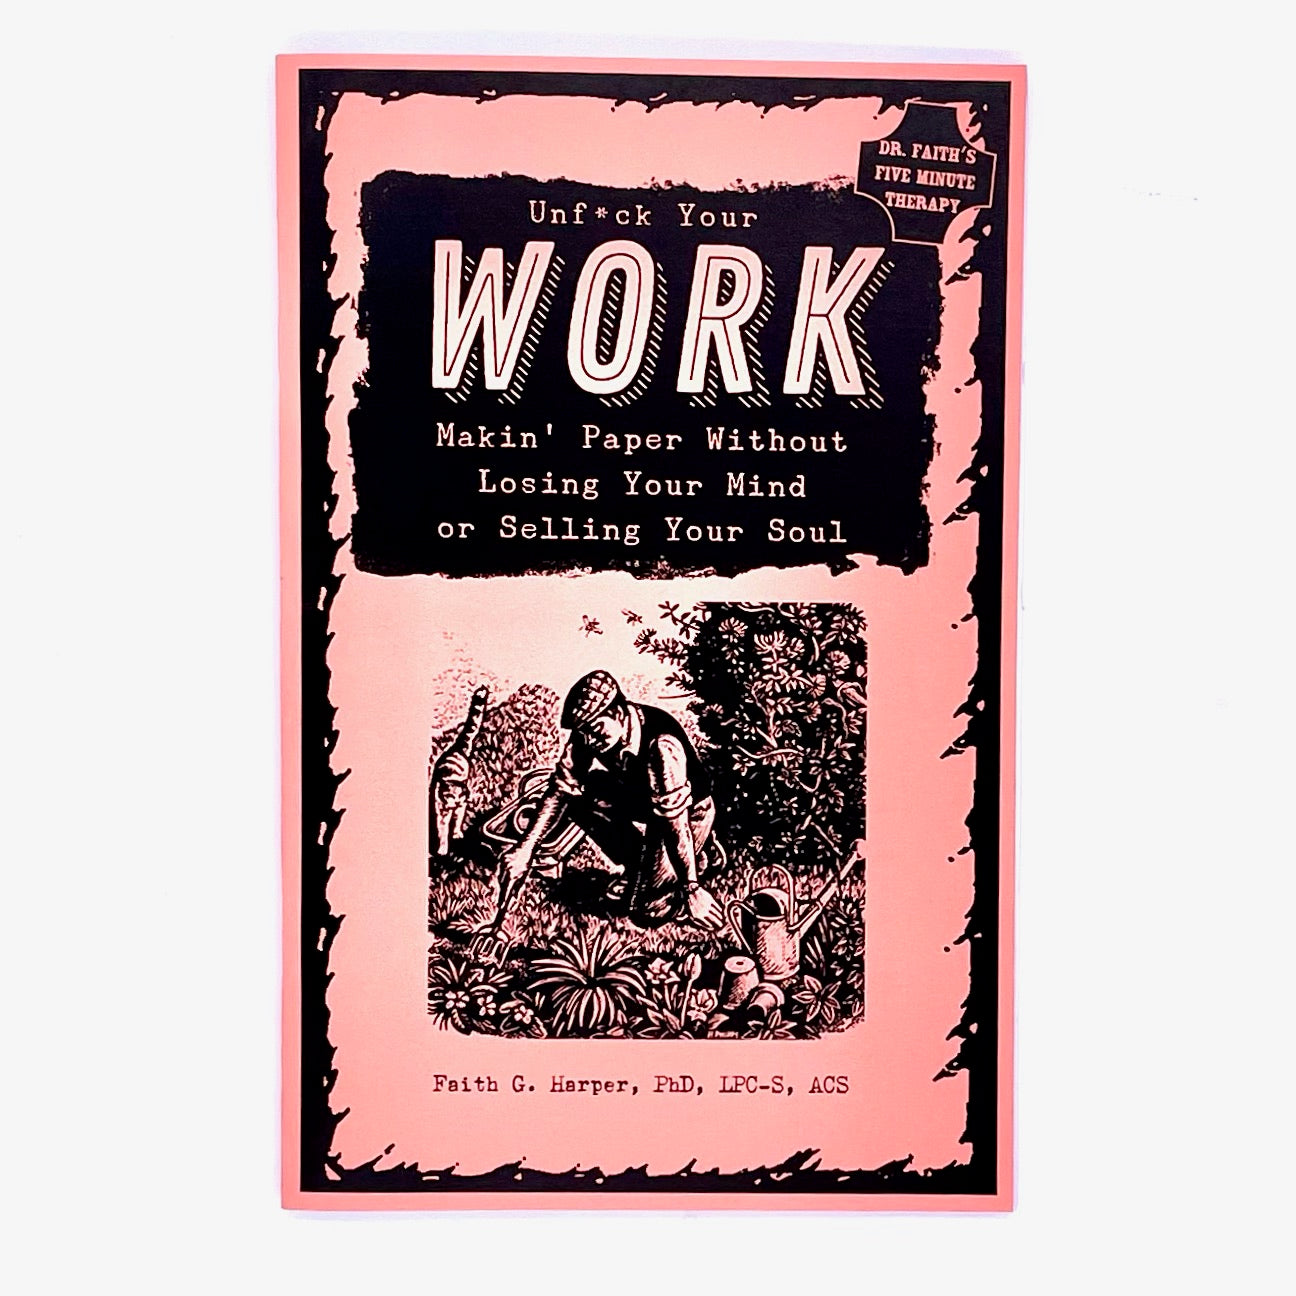 Book cover of Unfuck Your Work, makin' paper without losing your mind or selling your soul, by Faith G Harper.